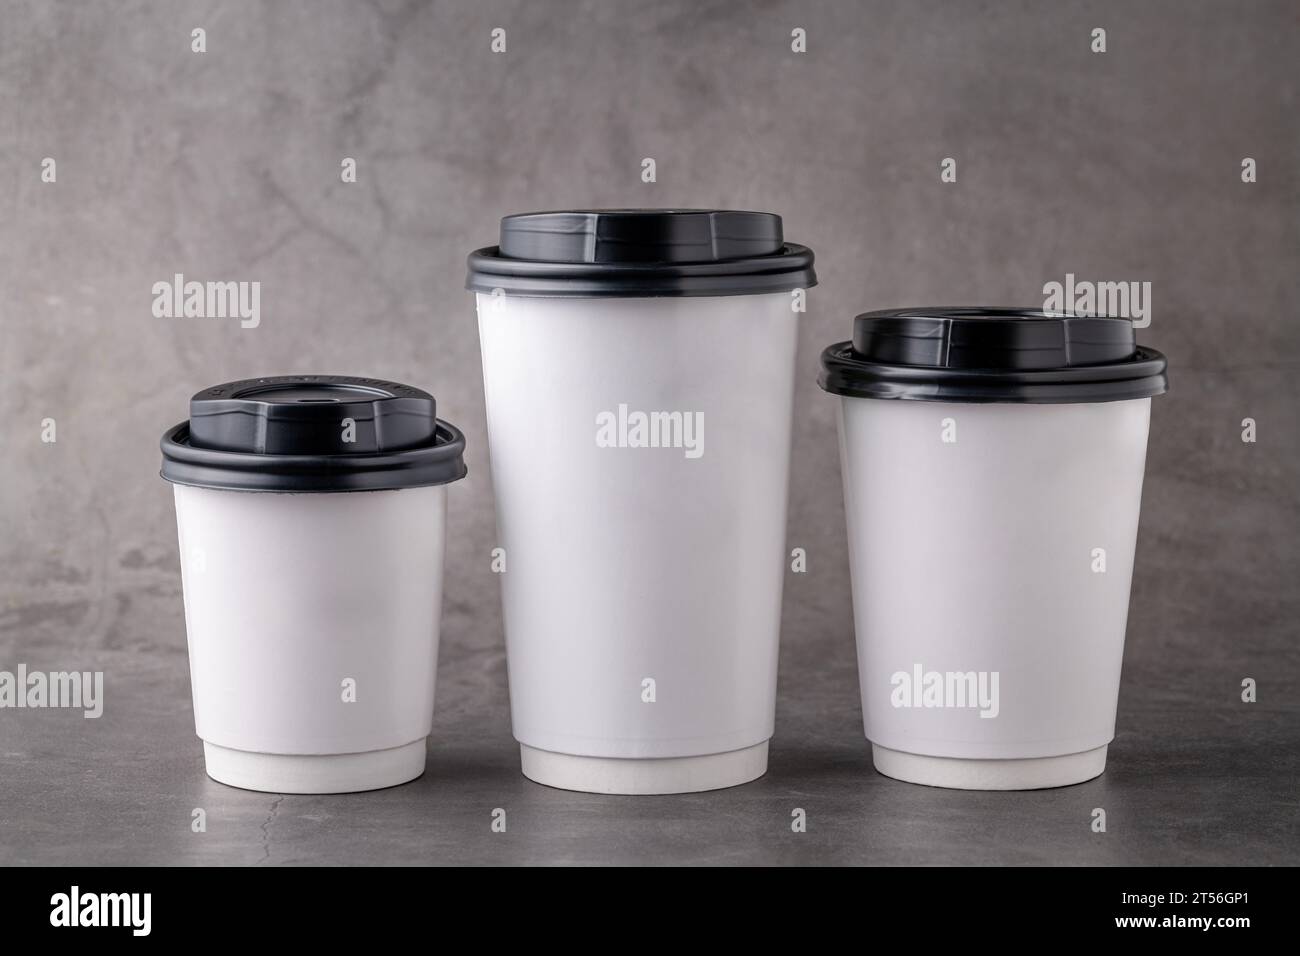 https://c8.alamy.com/comp/2T56GP1/three-different-sizes-of-white-takeaway-paper-cups-with-black-plastic-lids-isolated-on-gray-background-2T56GP1.jpg